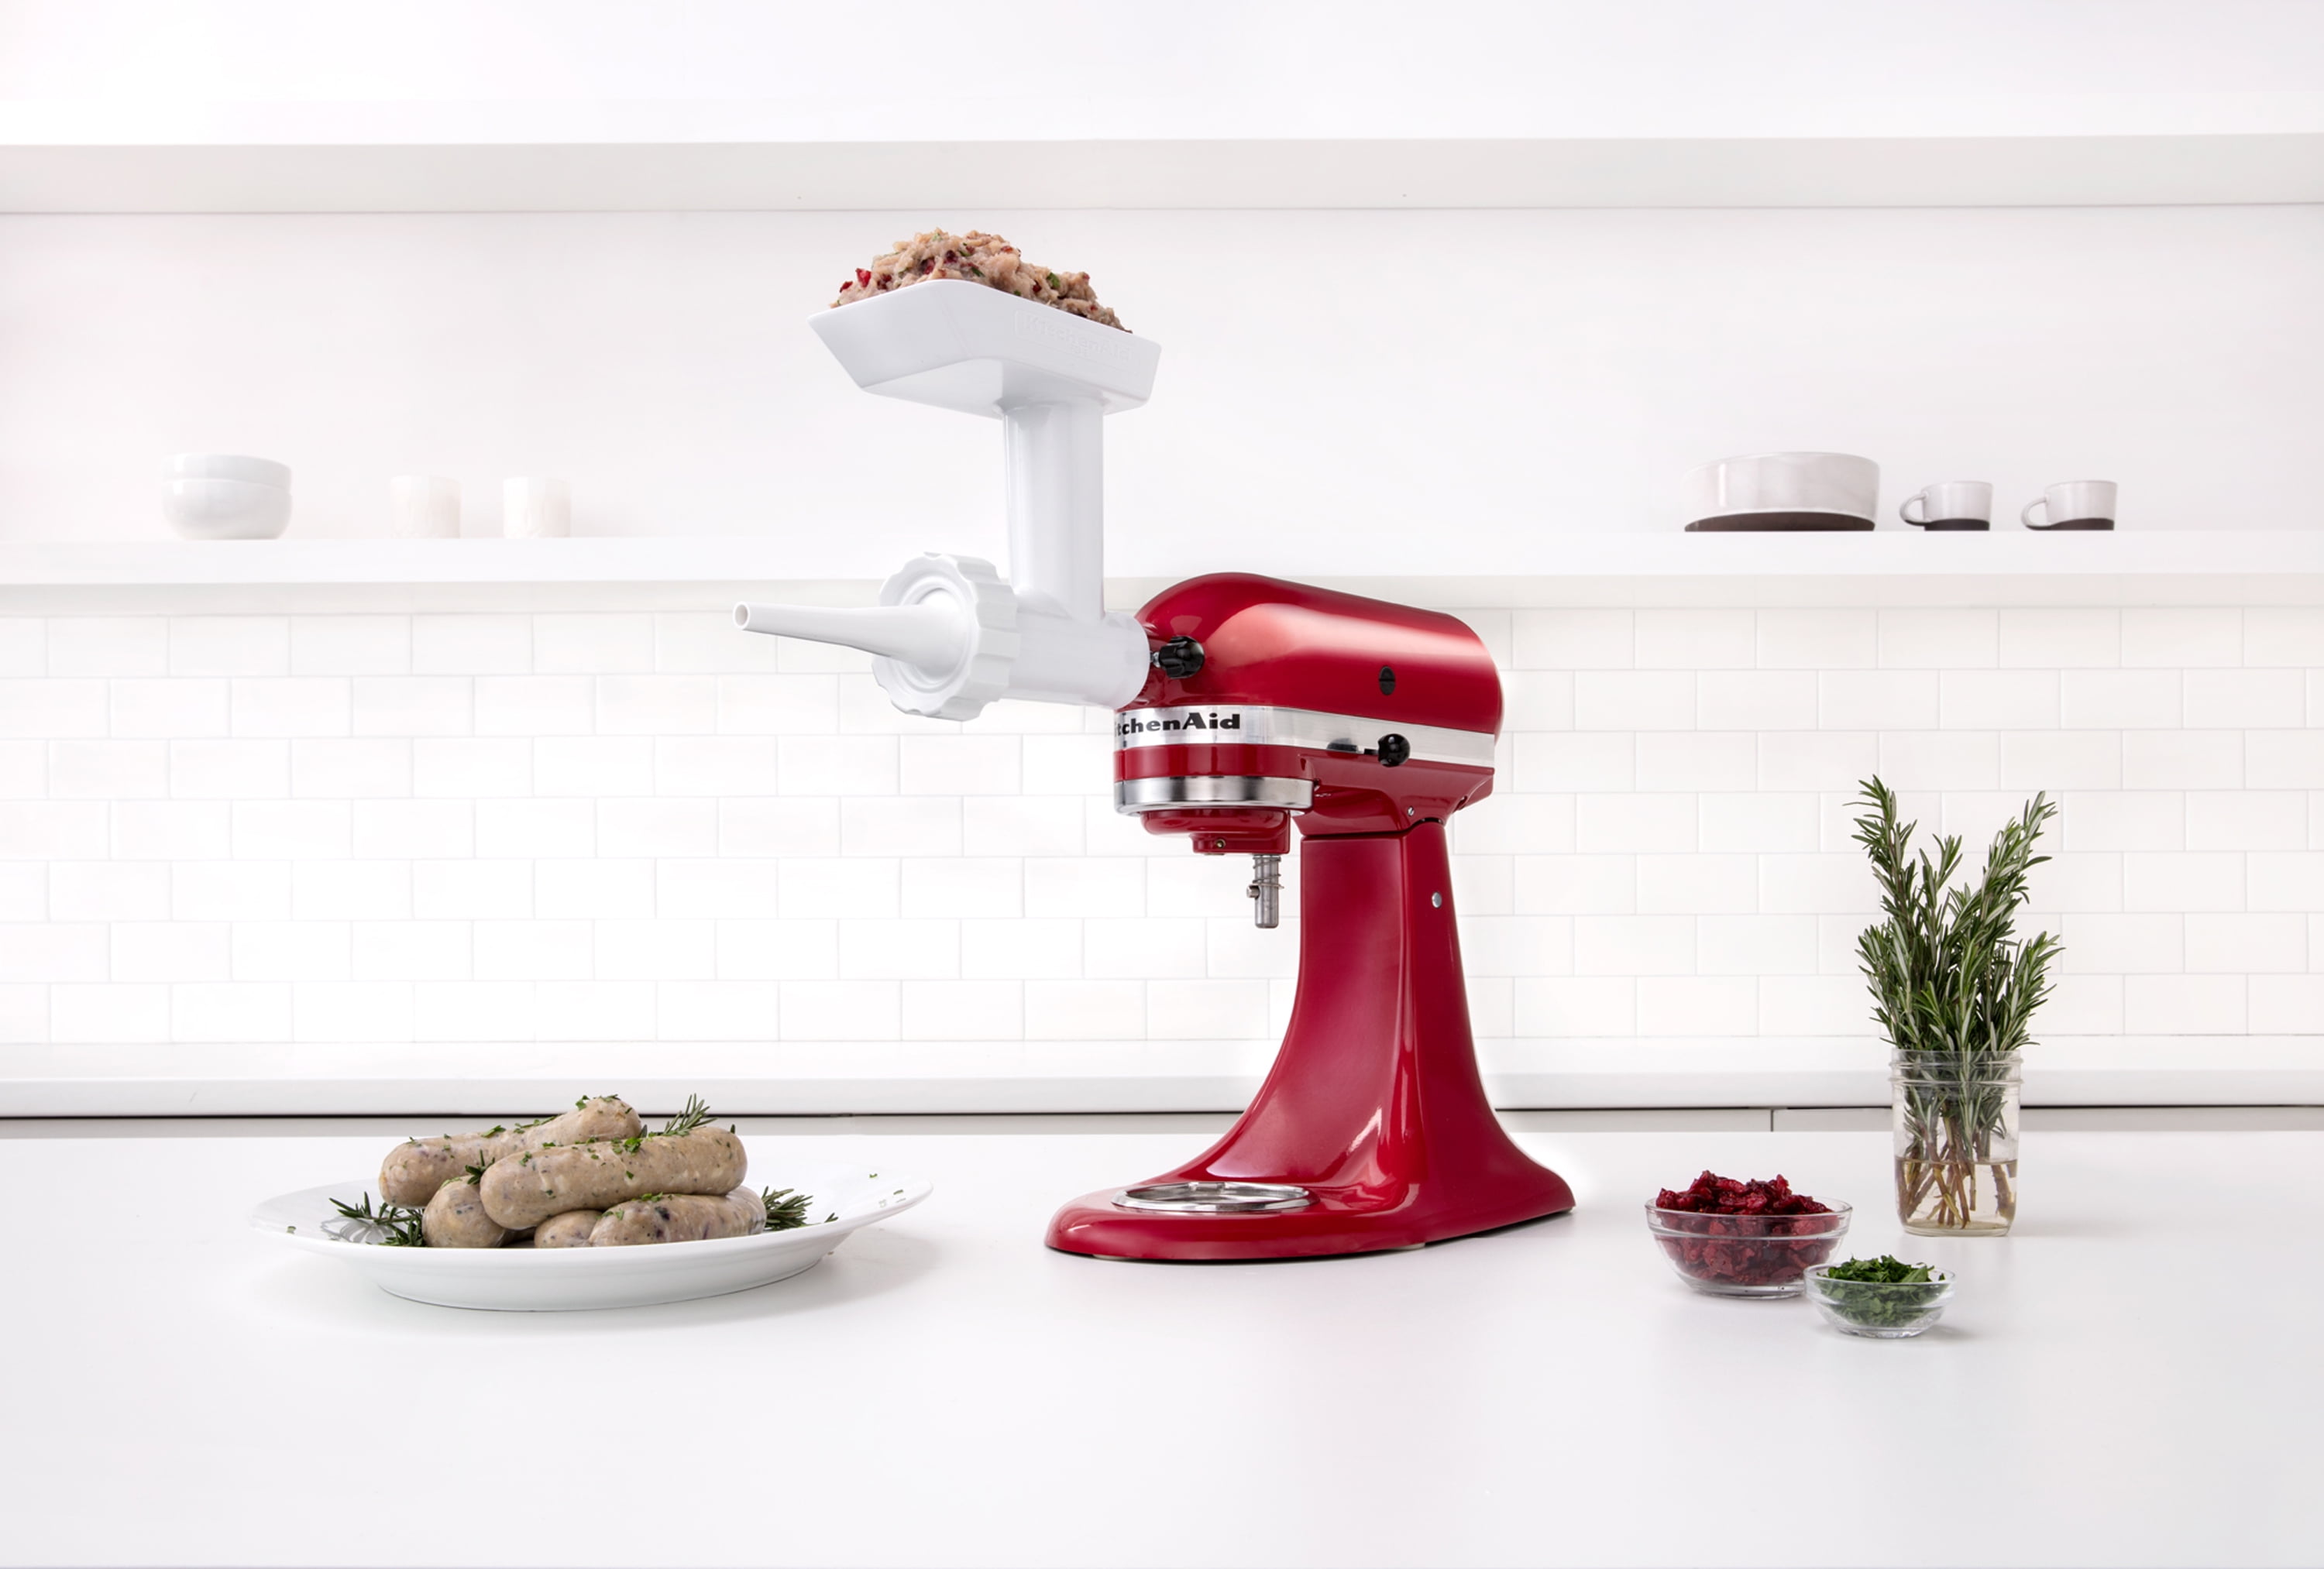 How to Make Sausage With a KitchenAid Stand Mixer